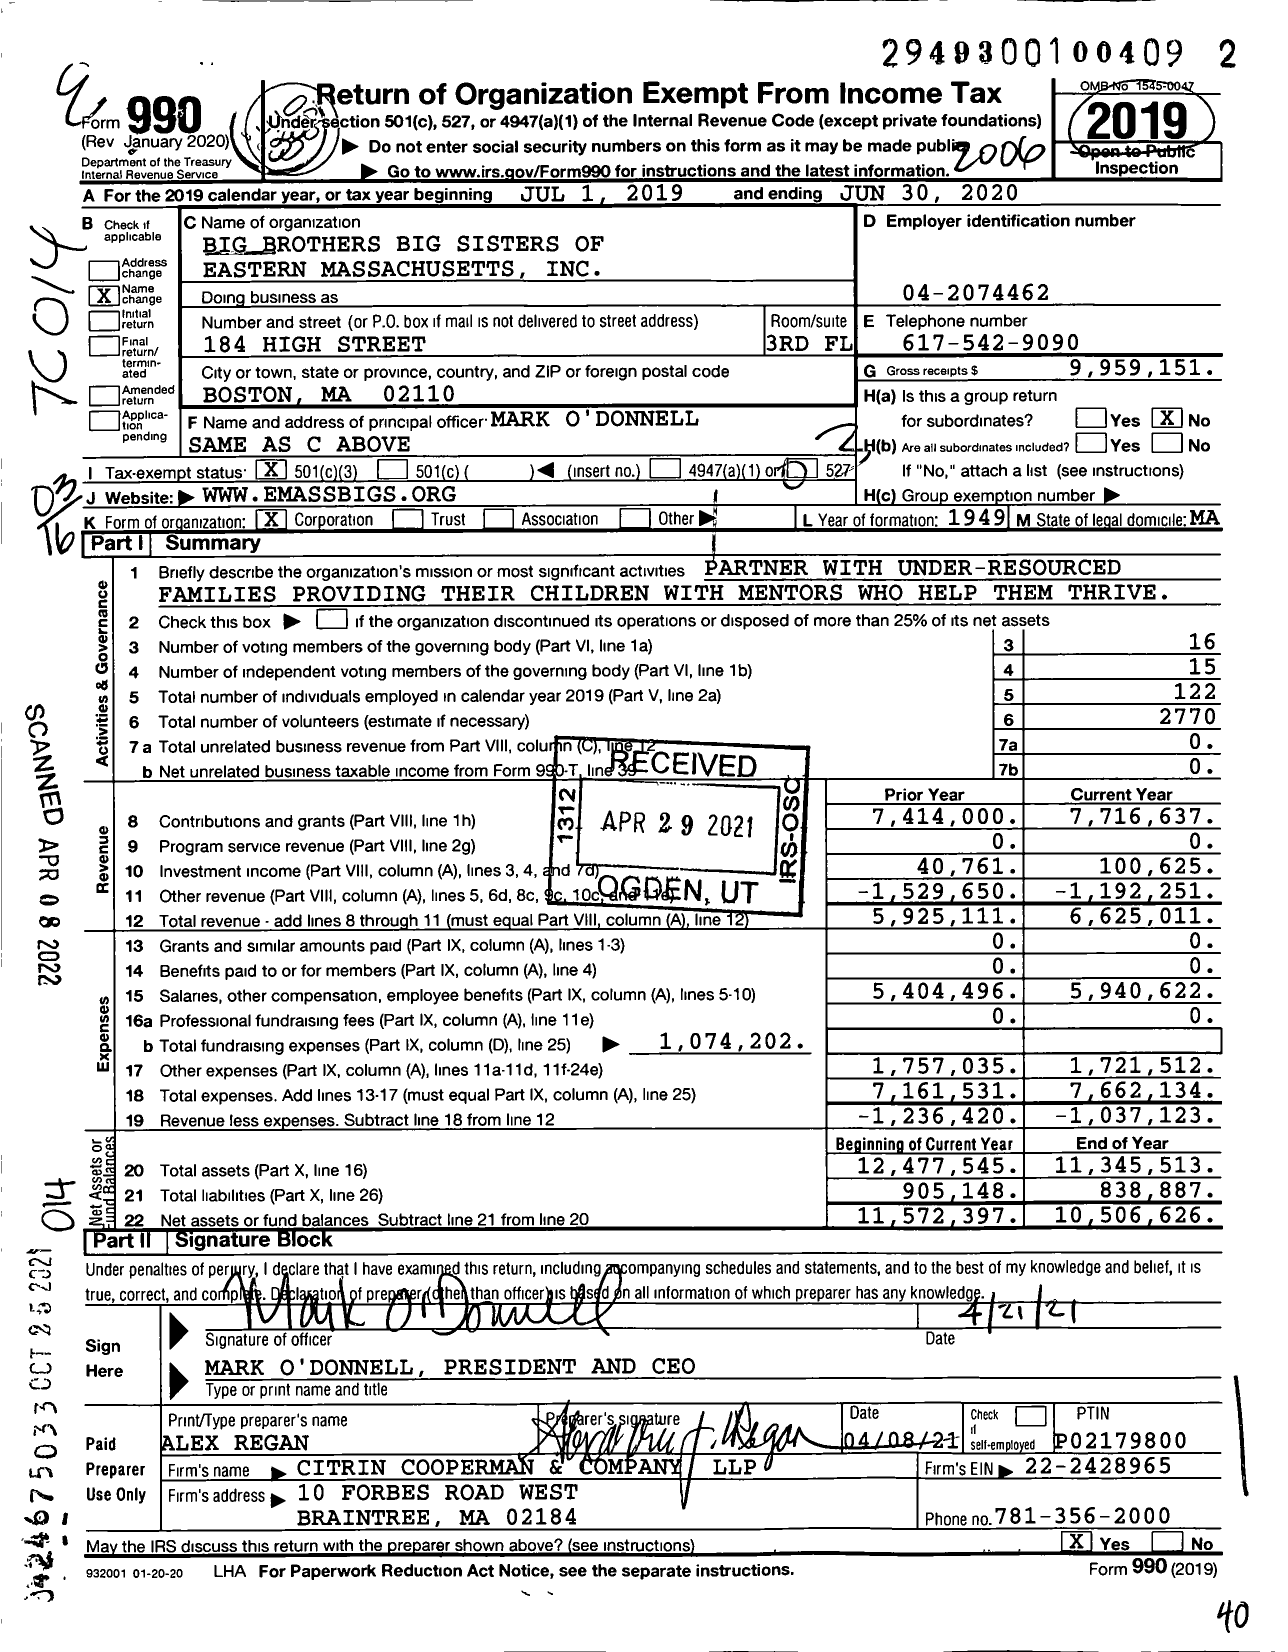 Image of first page of 2019 Form 990 for Big Brothers Big Sisters of Eastern Massachusetts (BBBSMB)